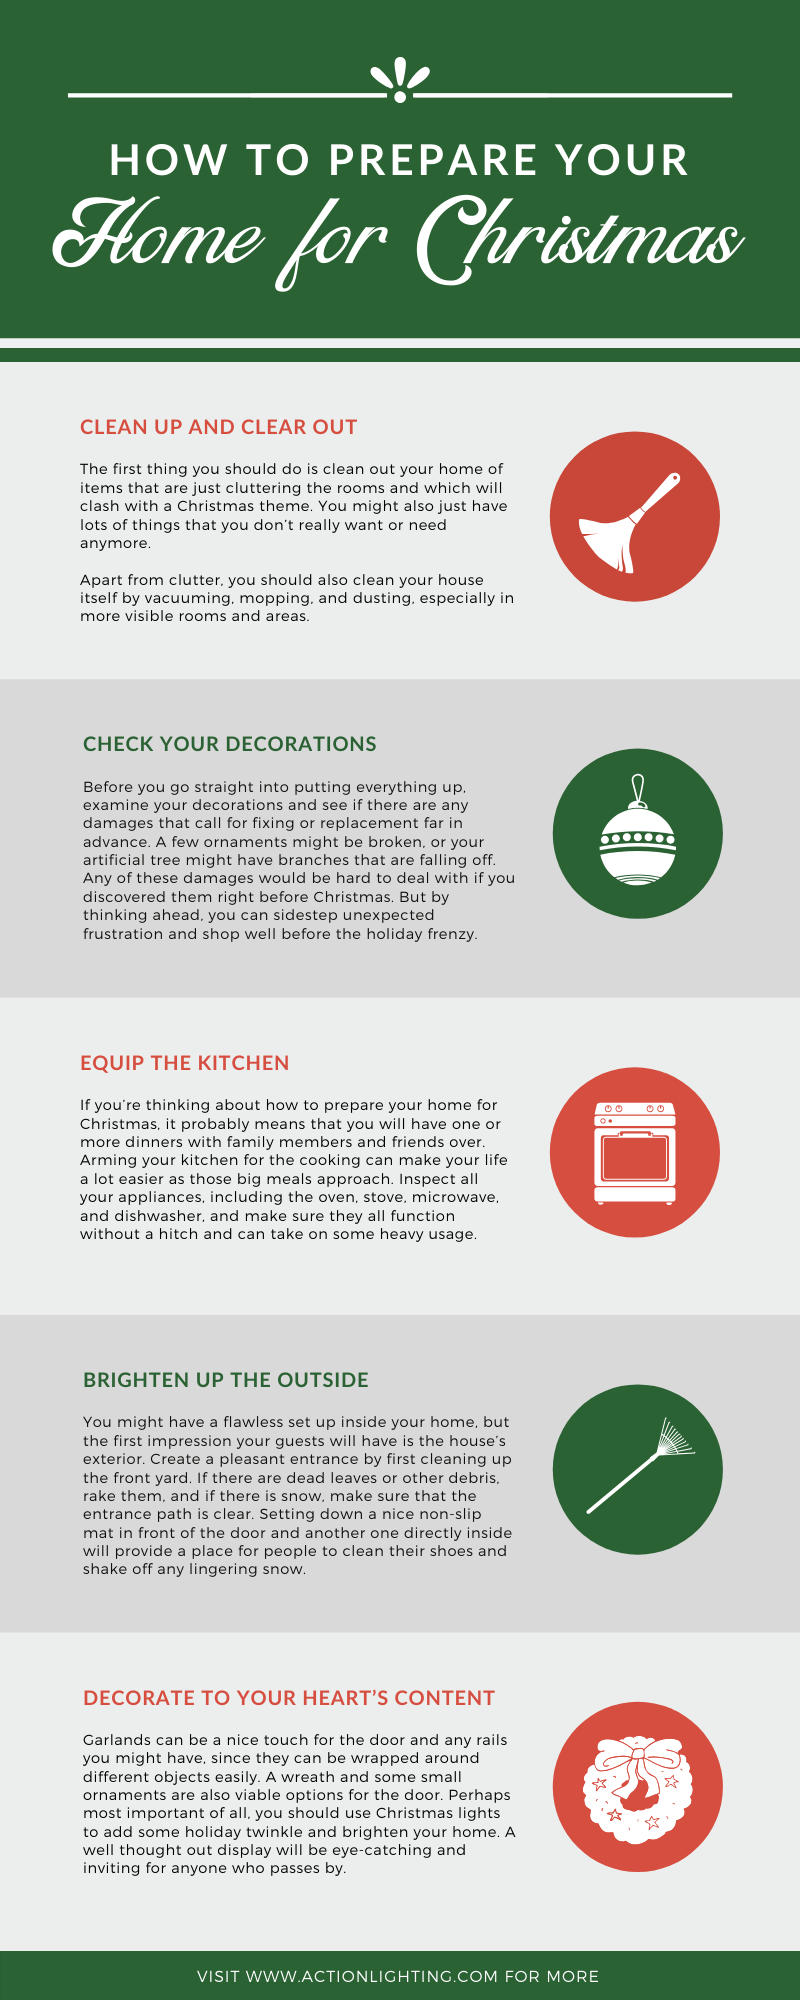 How to Prepare Your Home for Christmas infographic